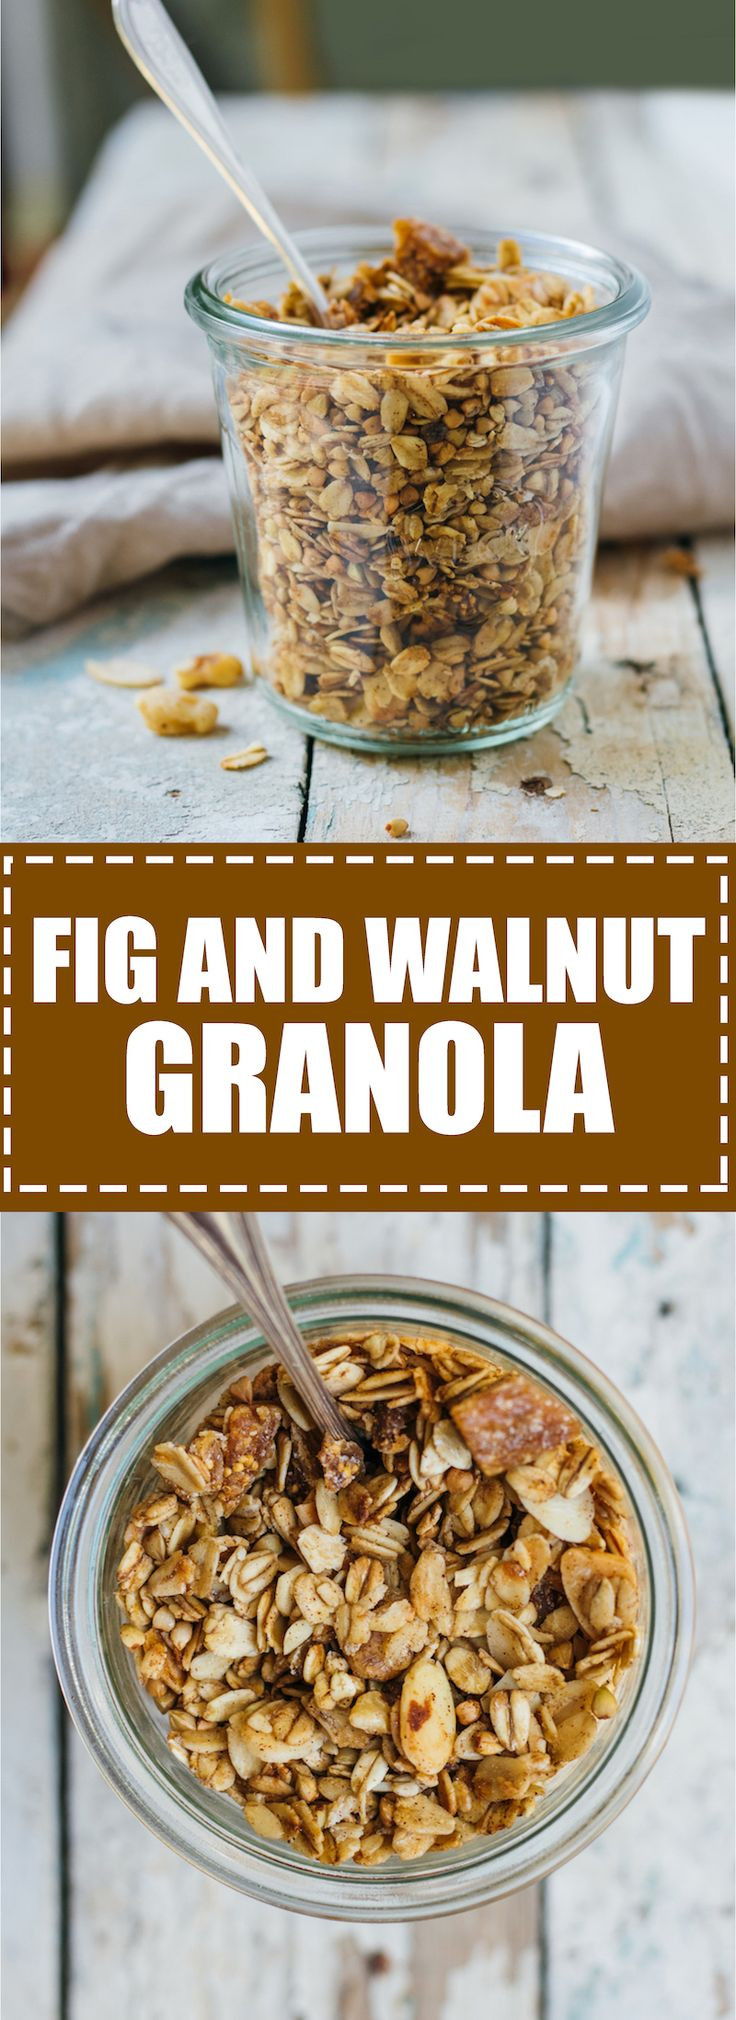 Healthy Dried Fig Recipes
 The 25 best Dried fig recipes ideas on Pinterest